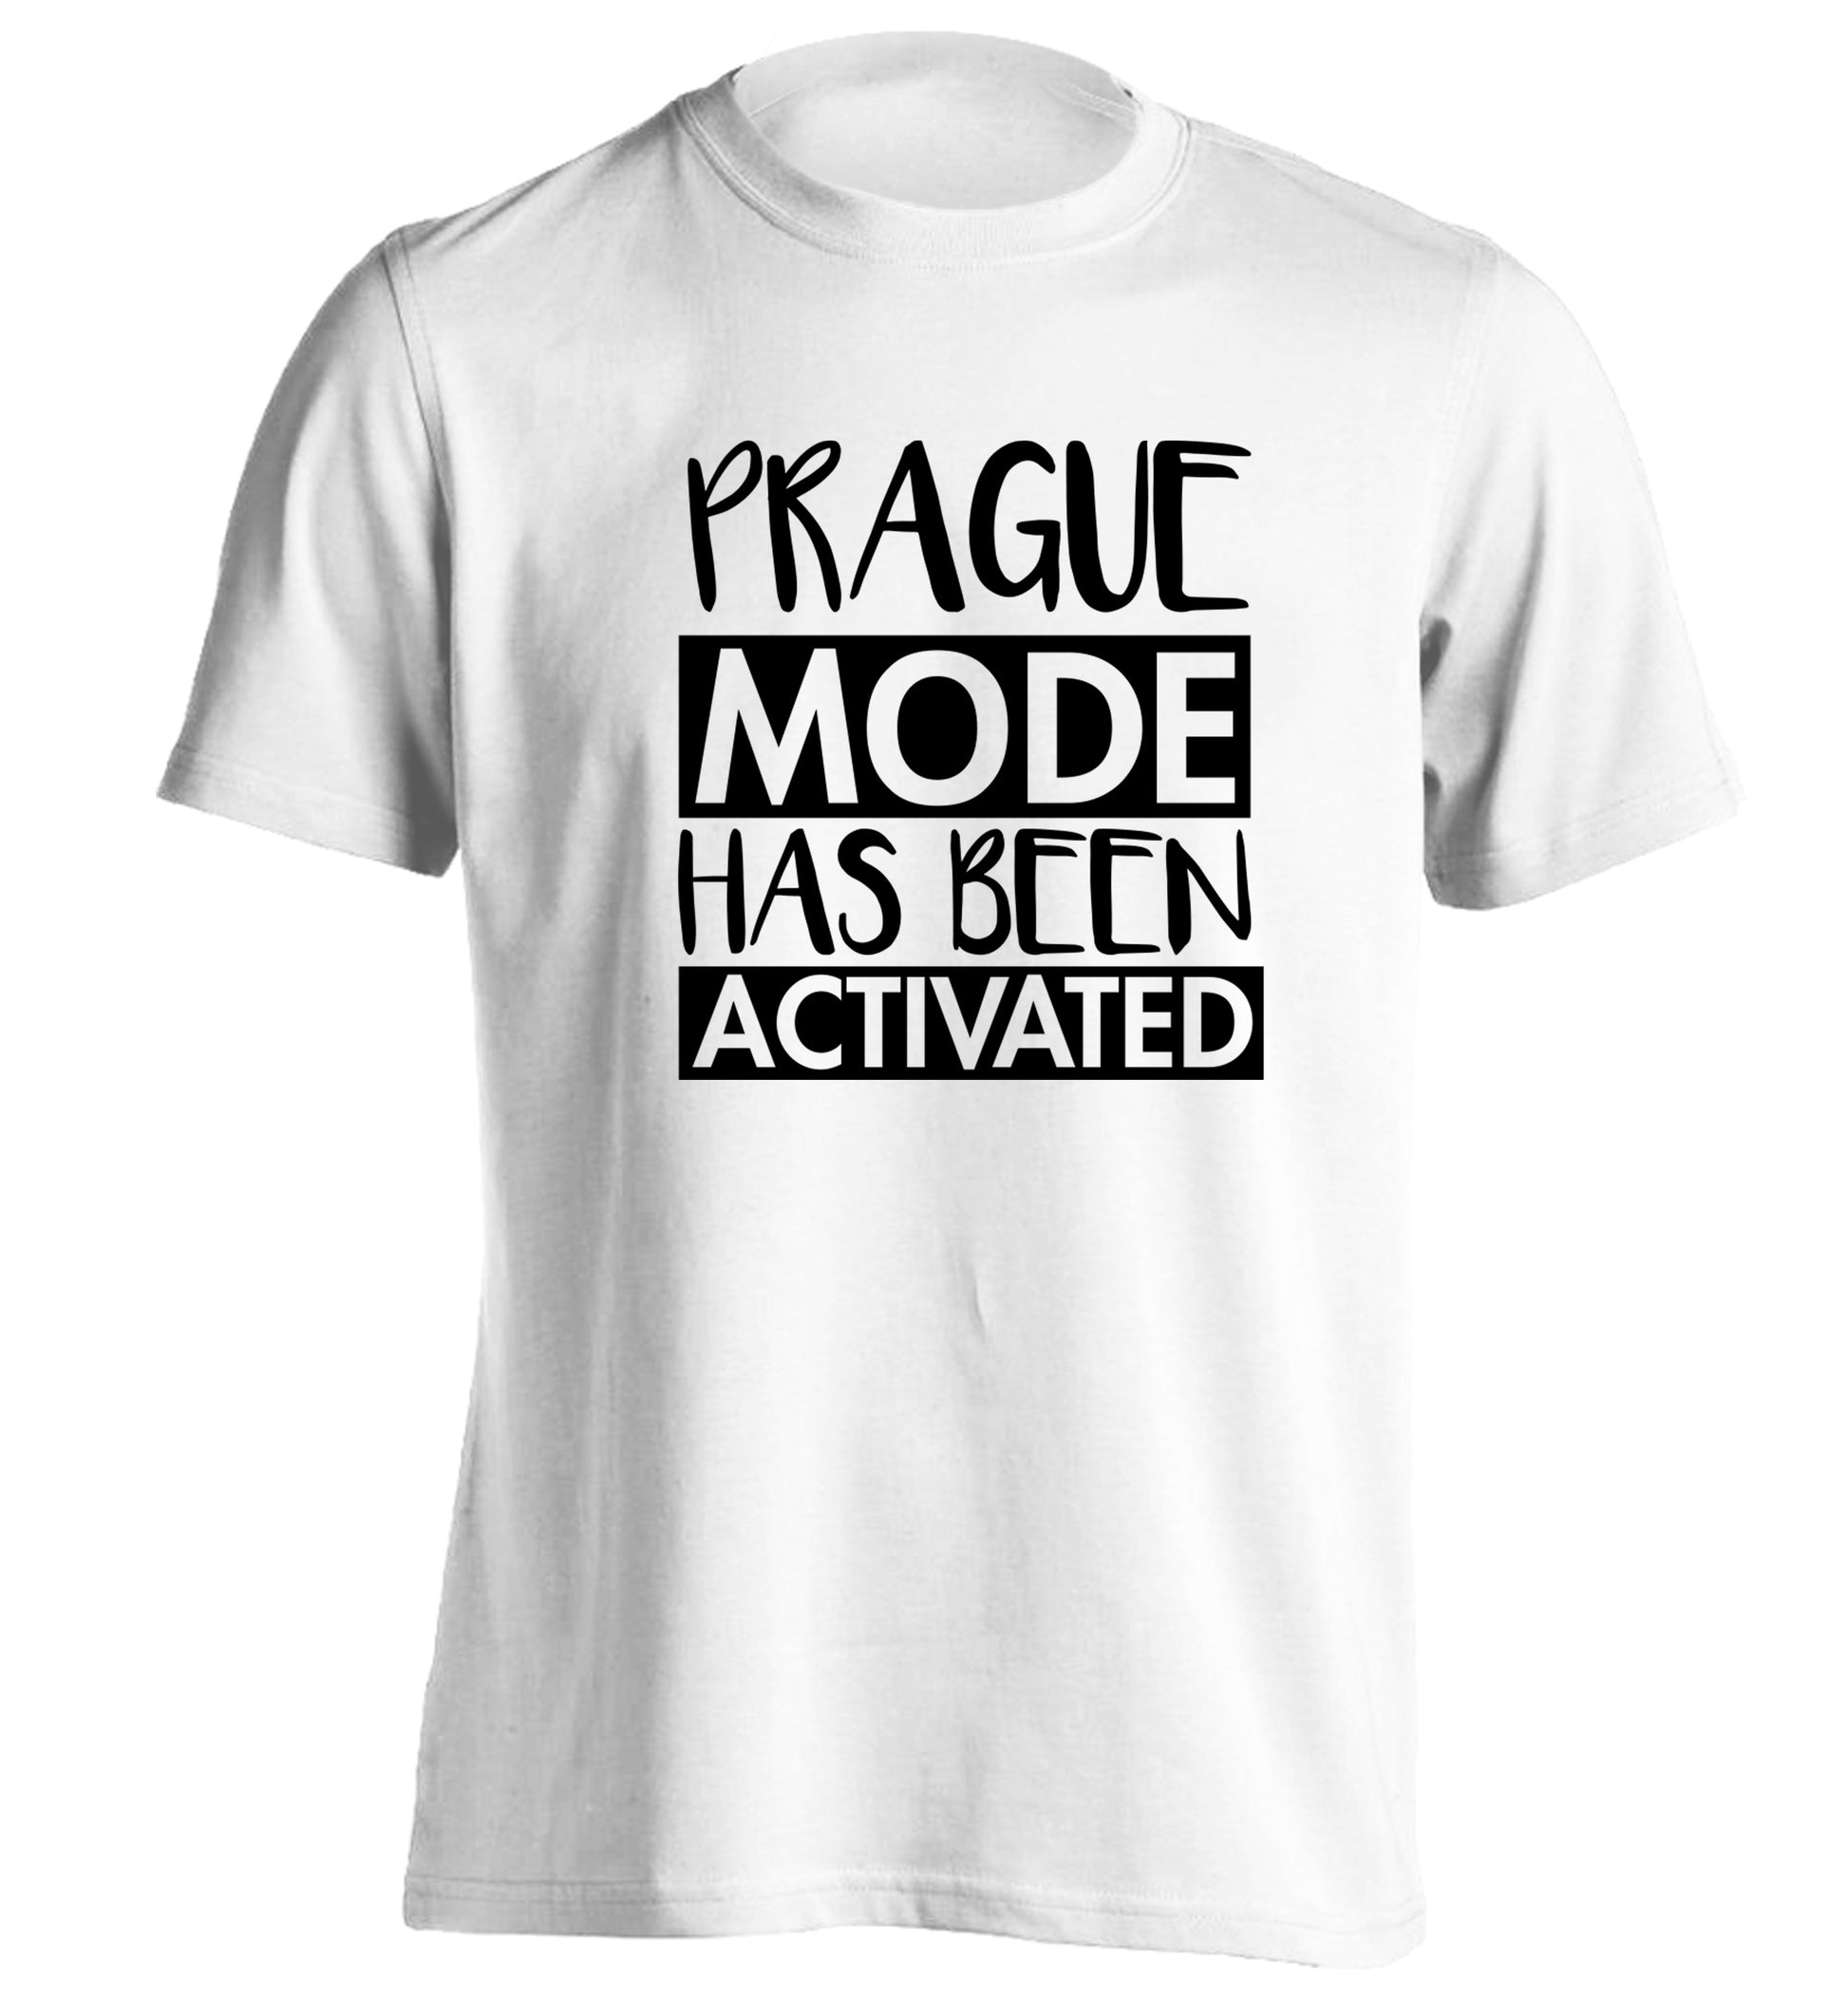 Prague mode has been activated adults unisex white Tshirt 2XL